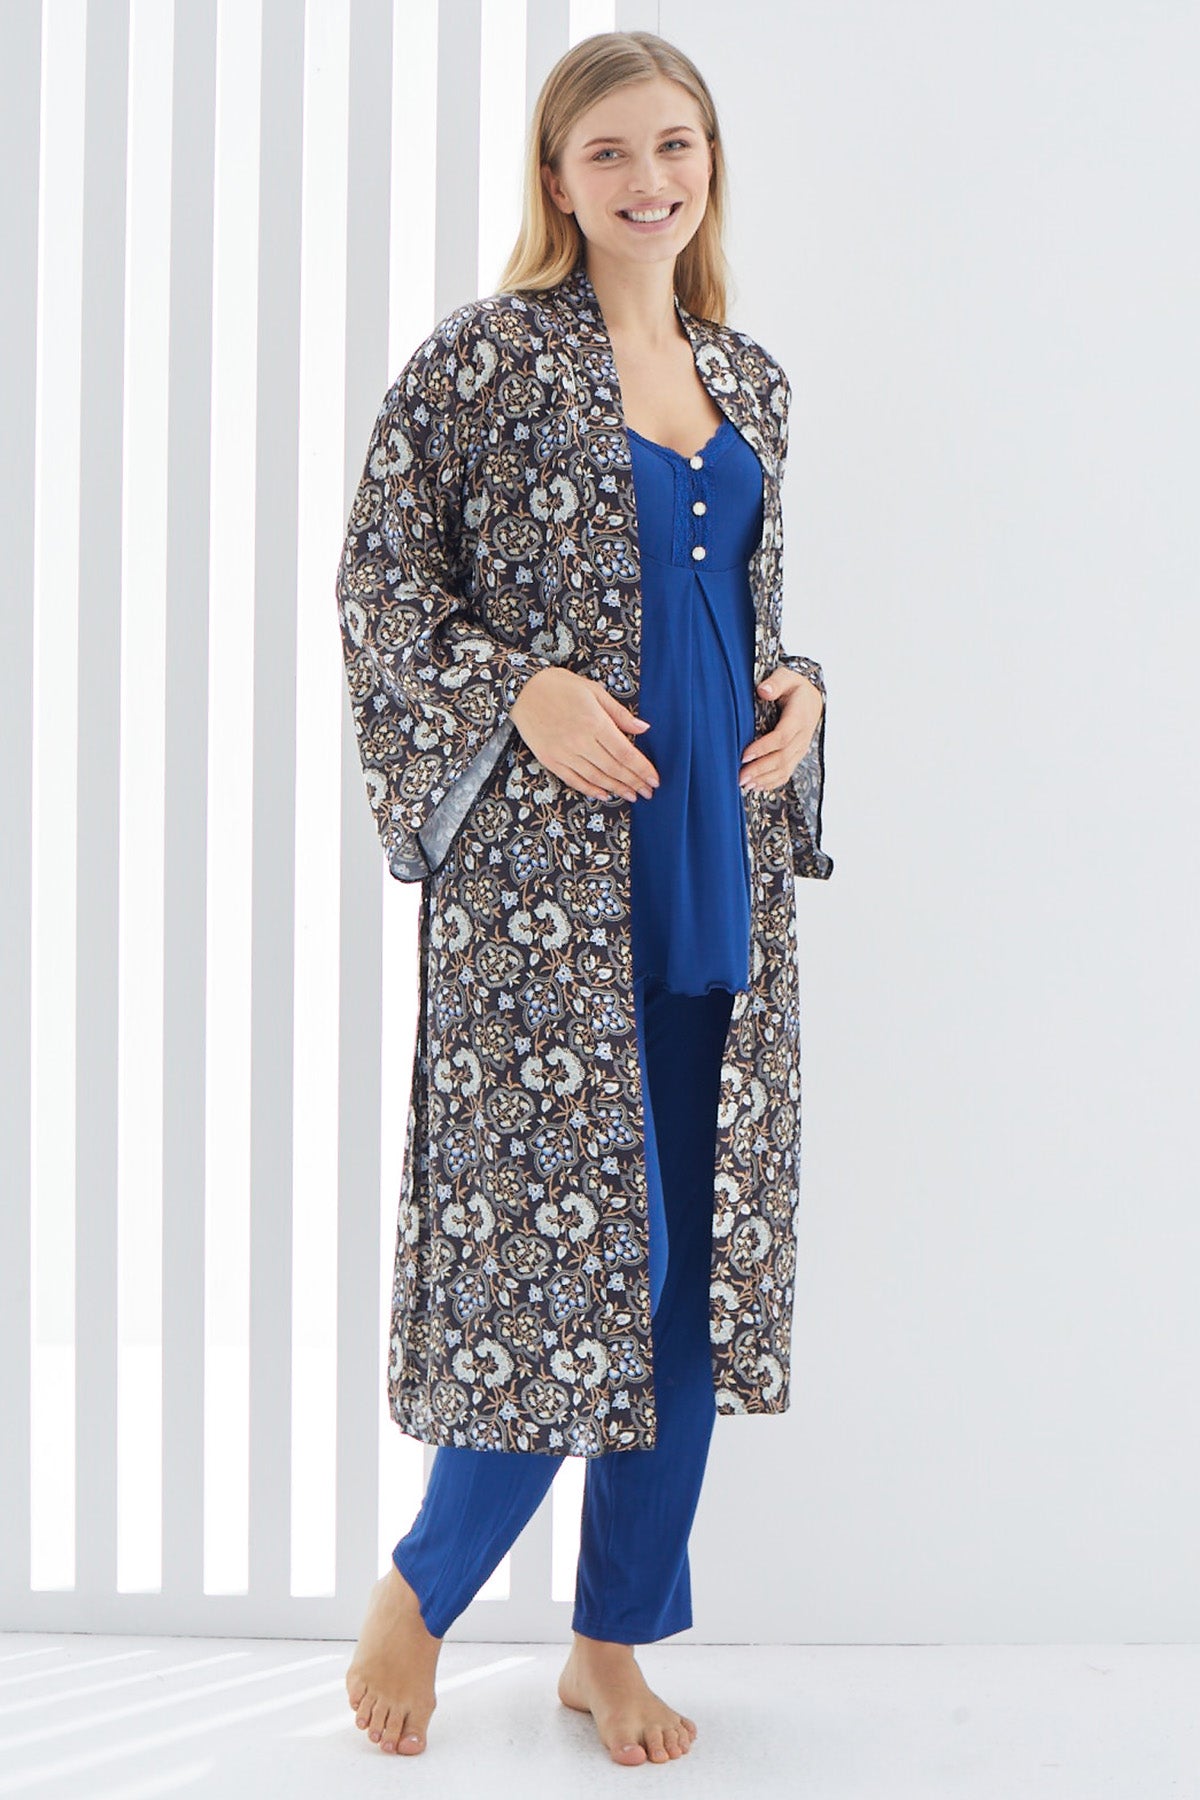 Shopymommy 3414 Lace 3-Pieces Maternity & Nursing Pajamas With Patterned Robe Navy Blue